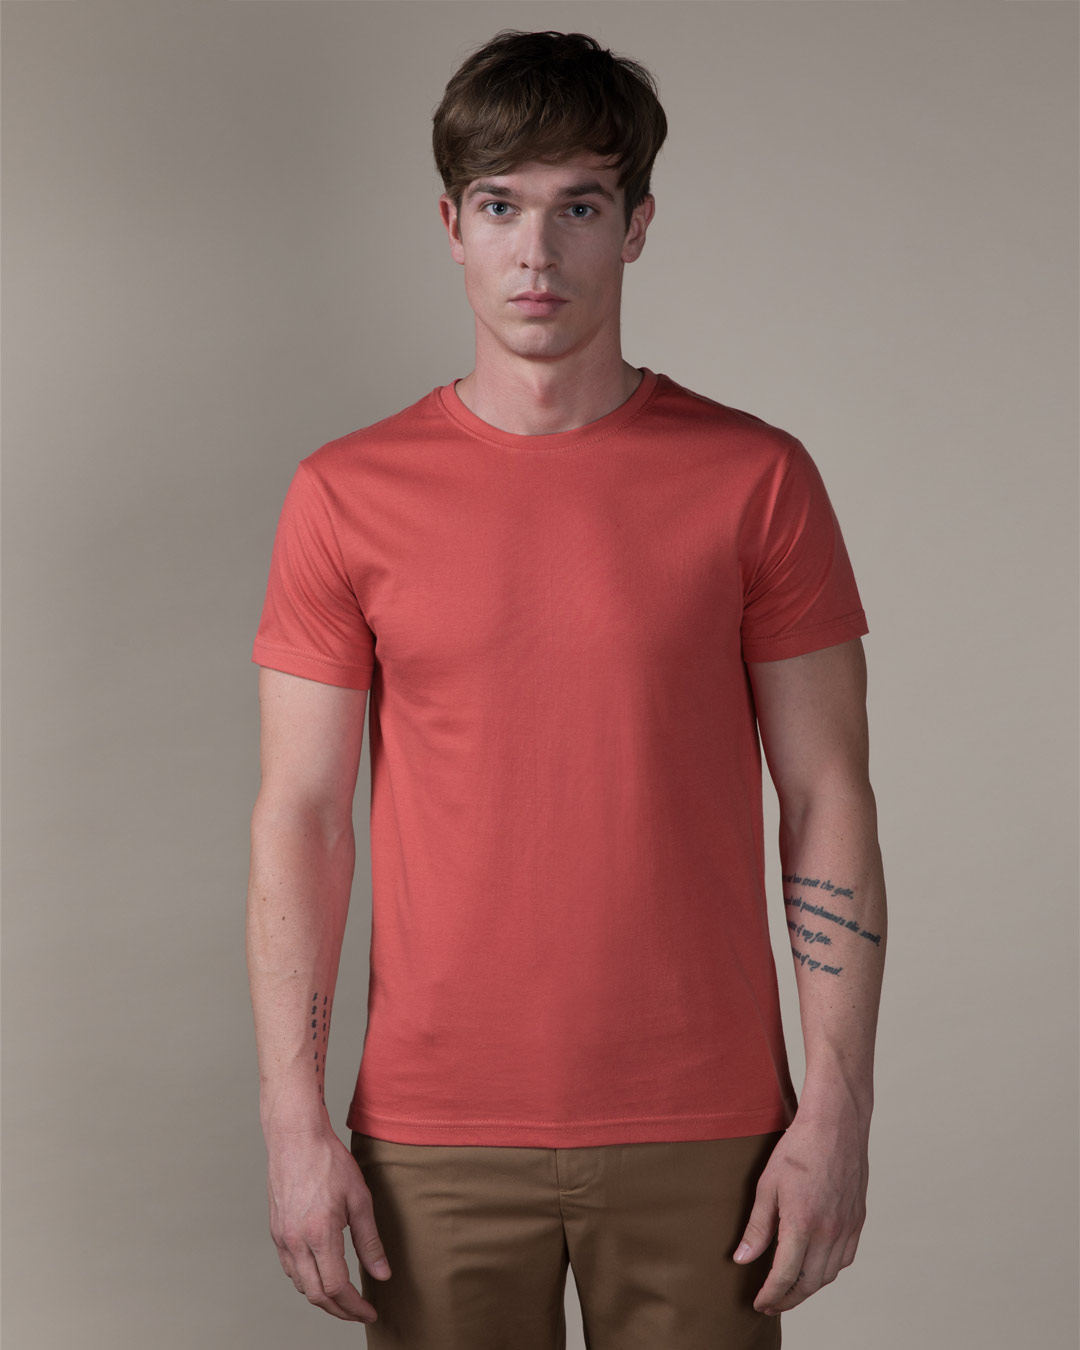 red t shirt mens